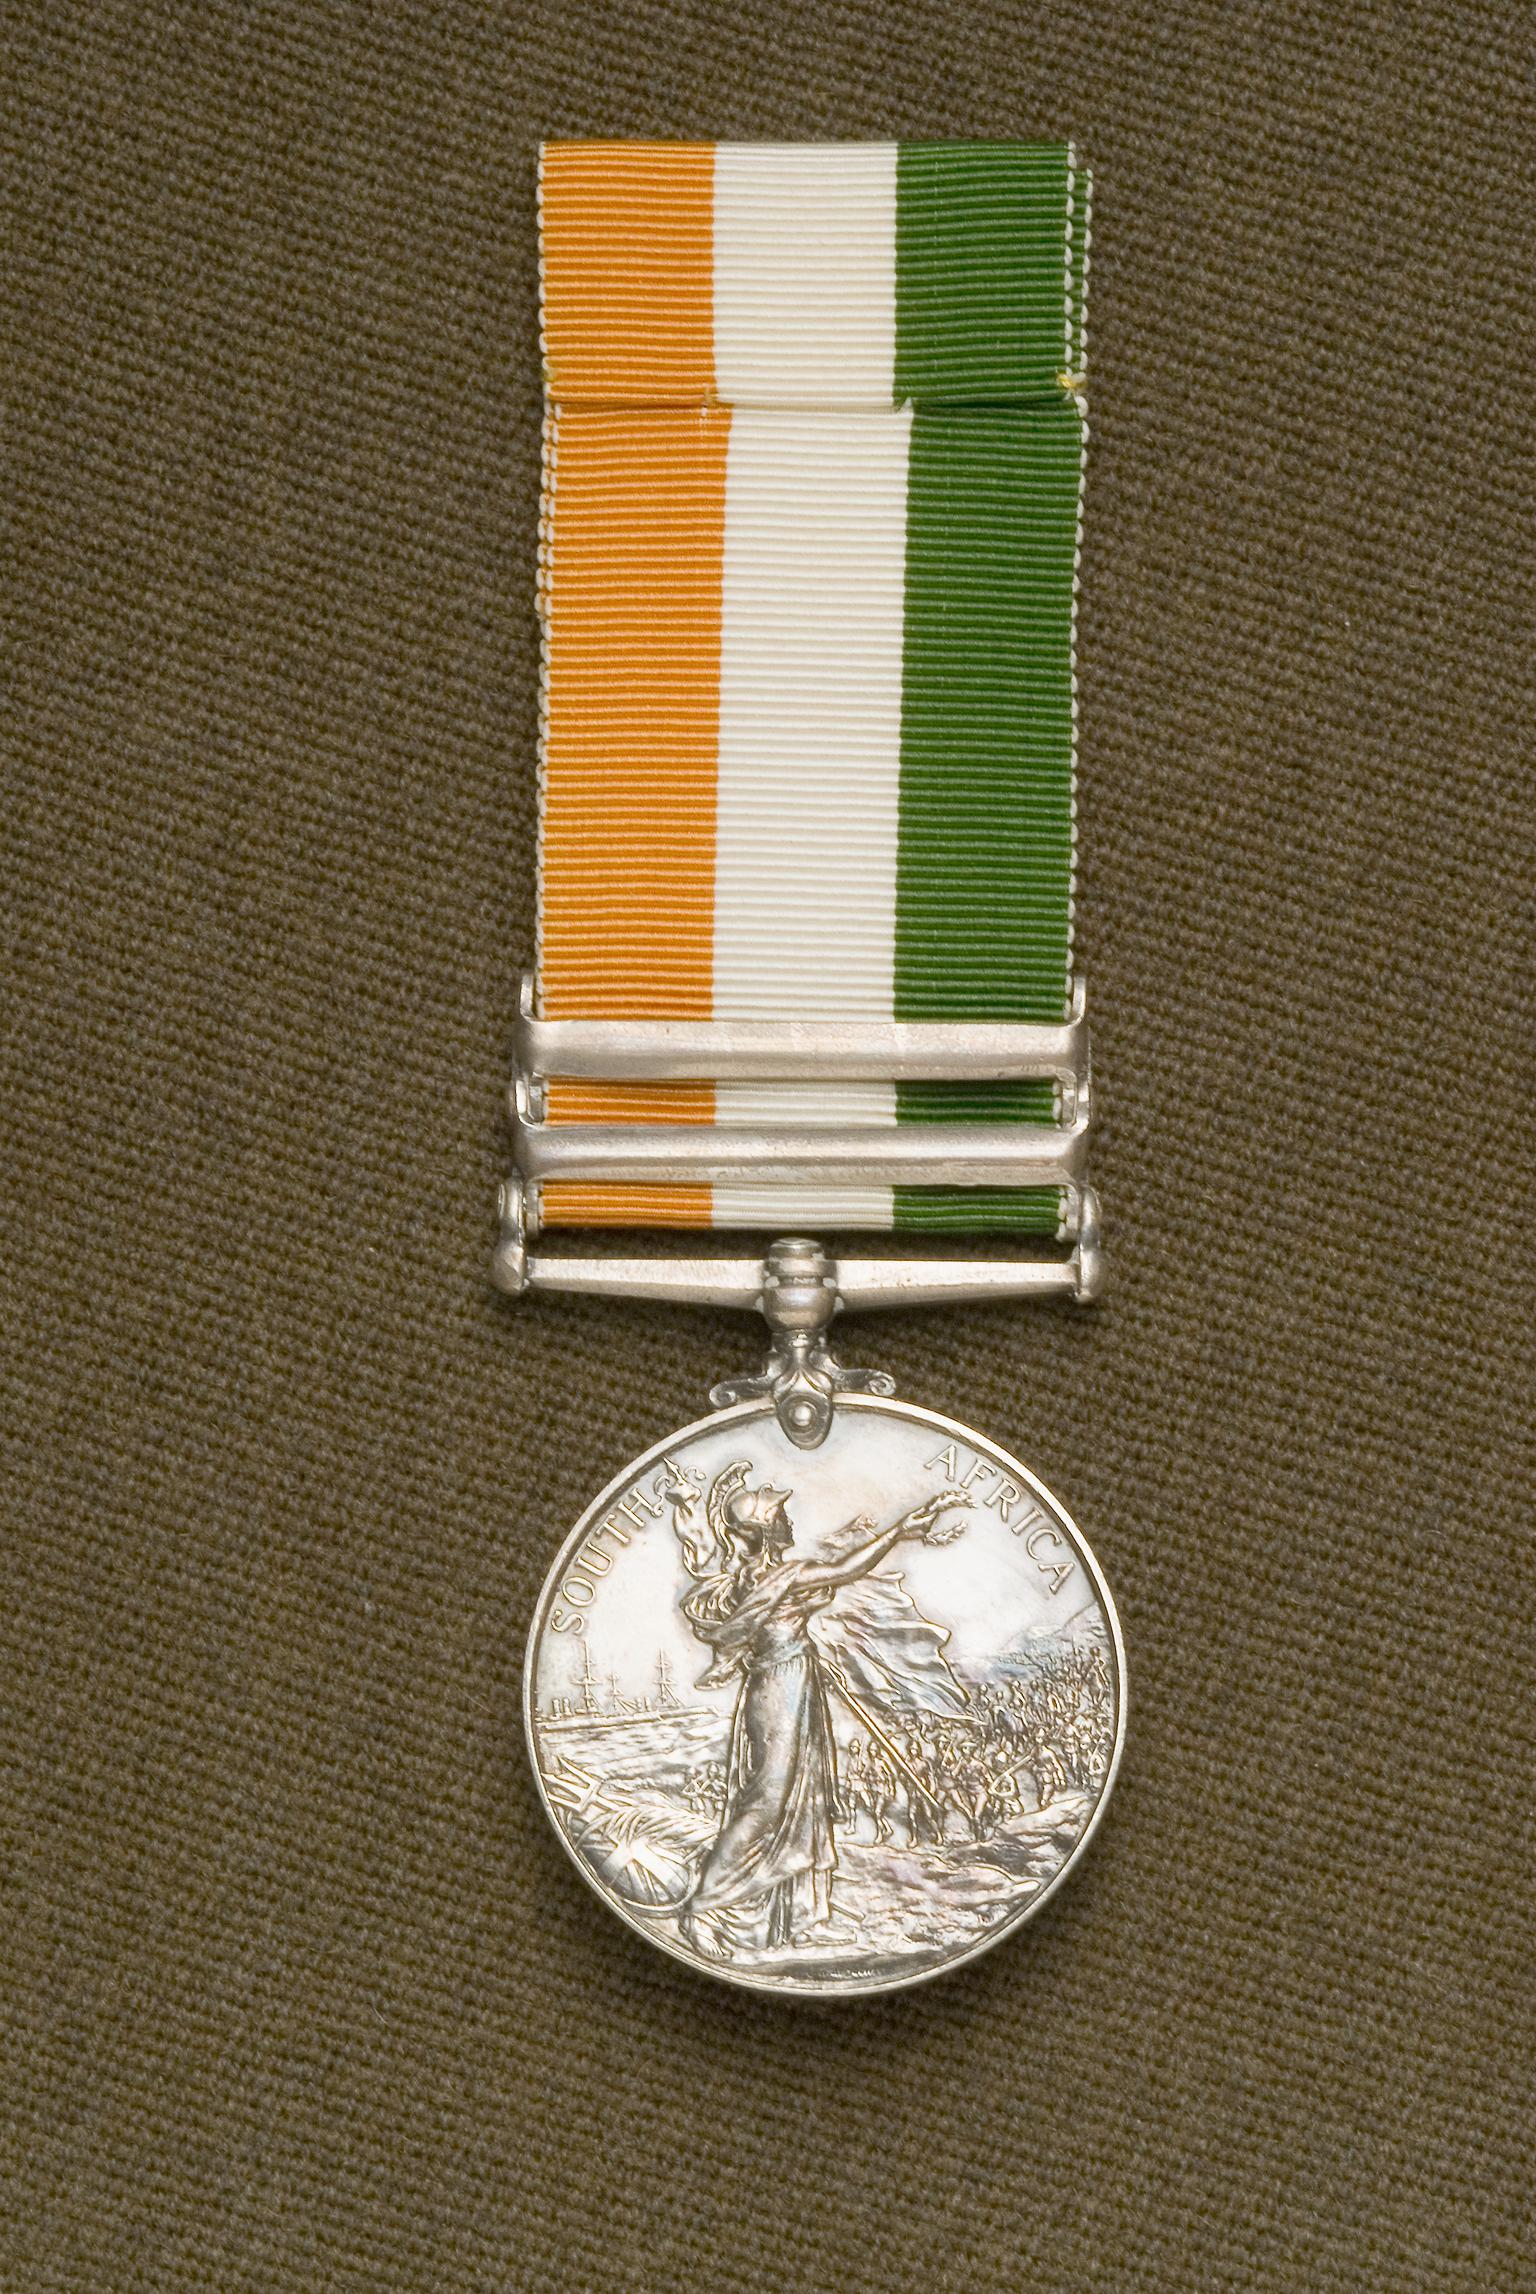 King's South Africa Medal, 1901-2